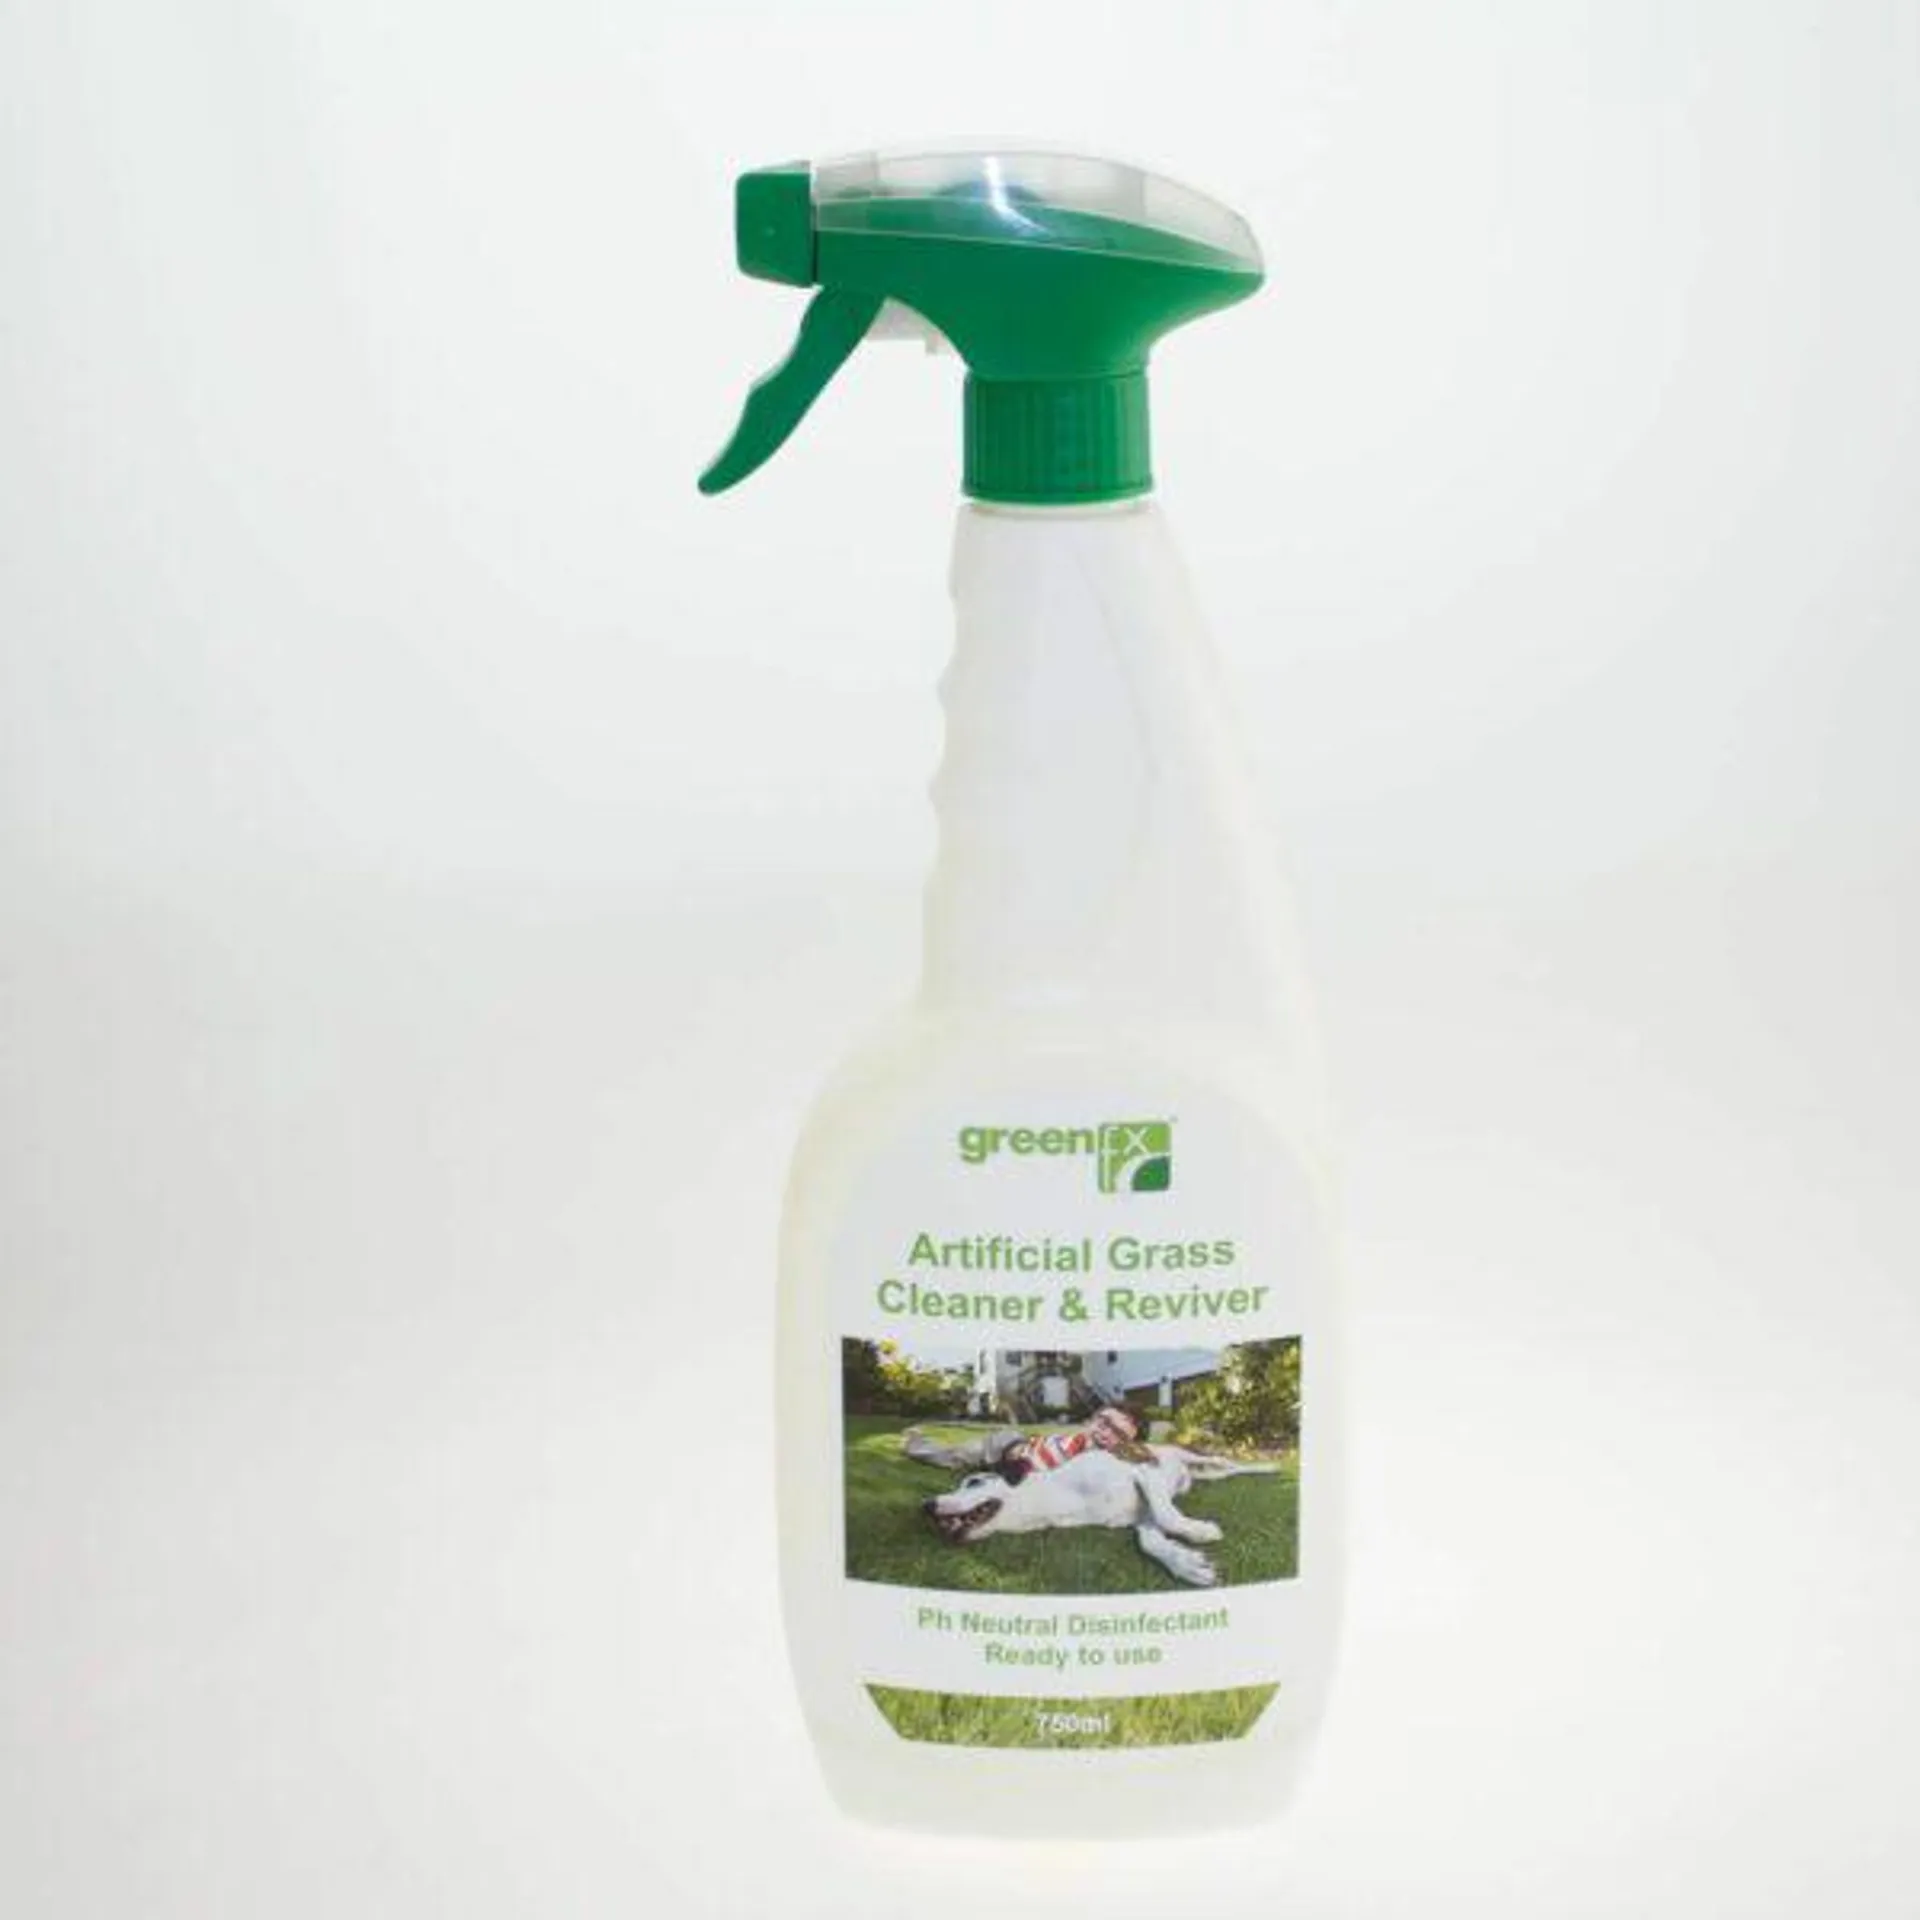 Greenfix Artificial Grass Cleaner and Reviver